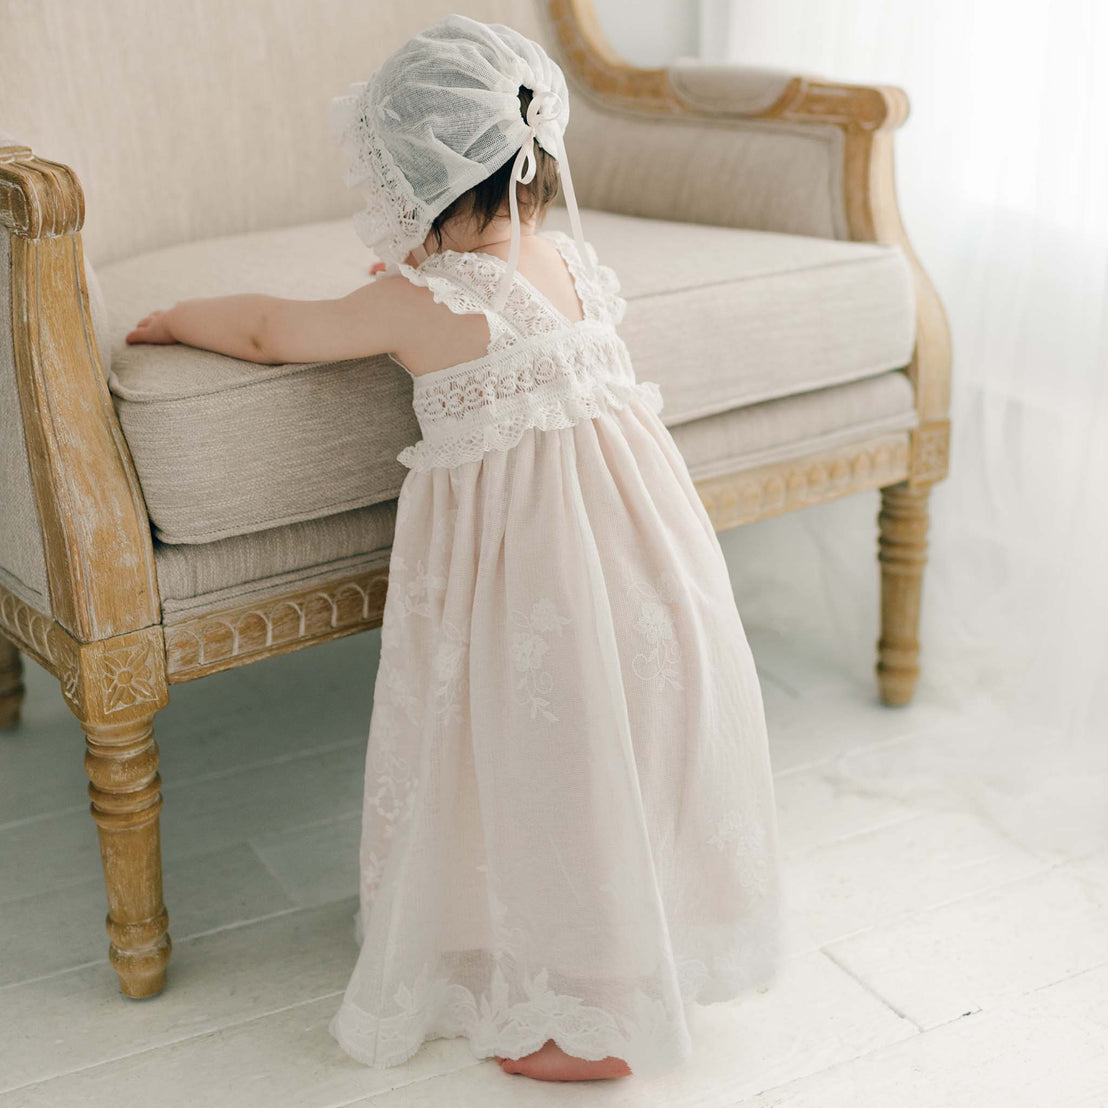 A young child in a Charlotte Christening Gown & Bonnet with rose and vine embroidery stands with her back to the camera, arms outstretched, in a bright, white room.